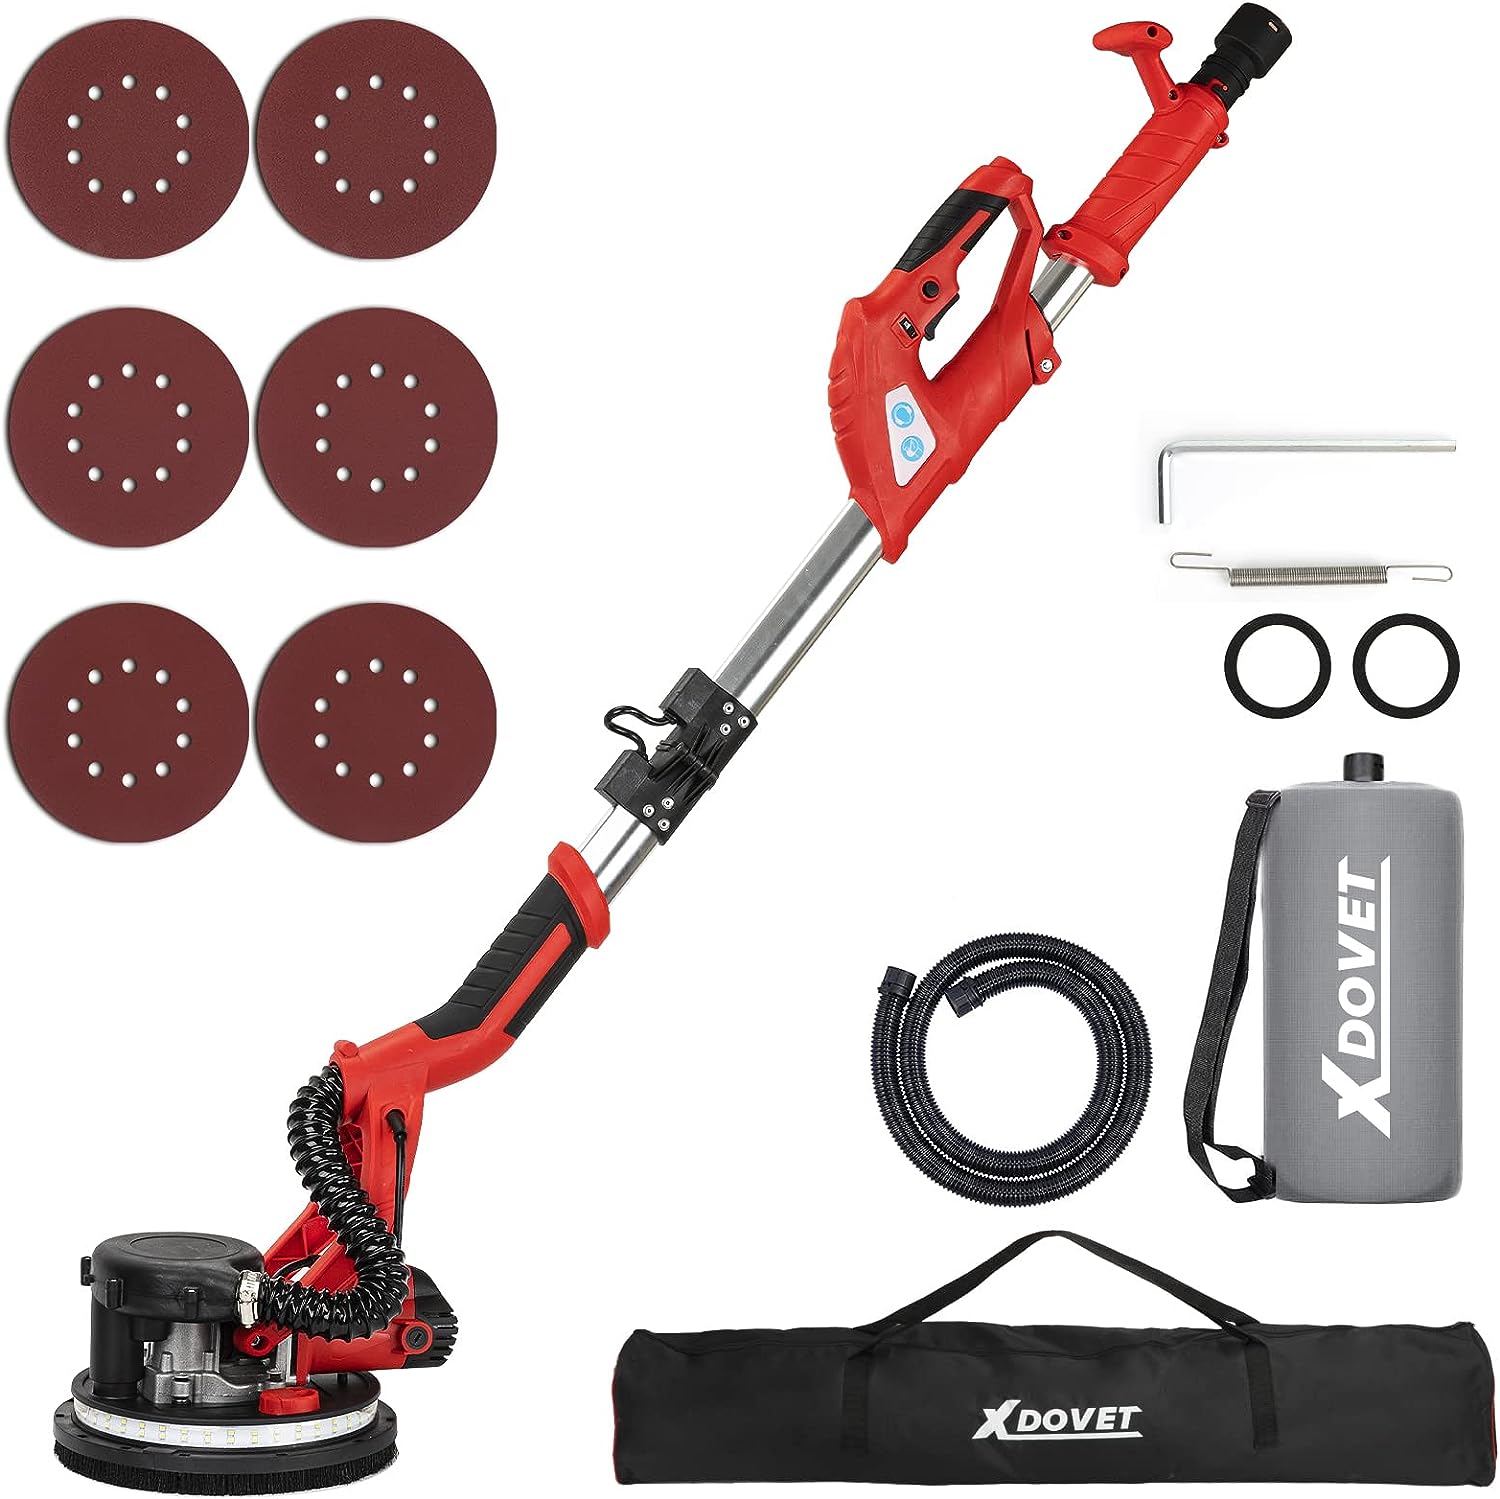 XDOVET Drywall Sander, 750W Electric Sander with 6 Pcs [...]